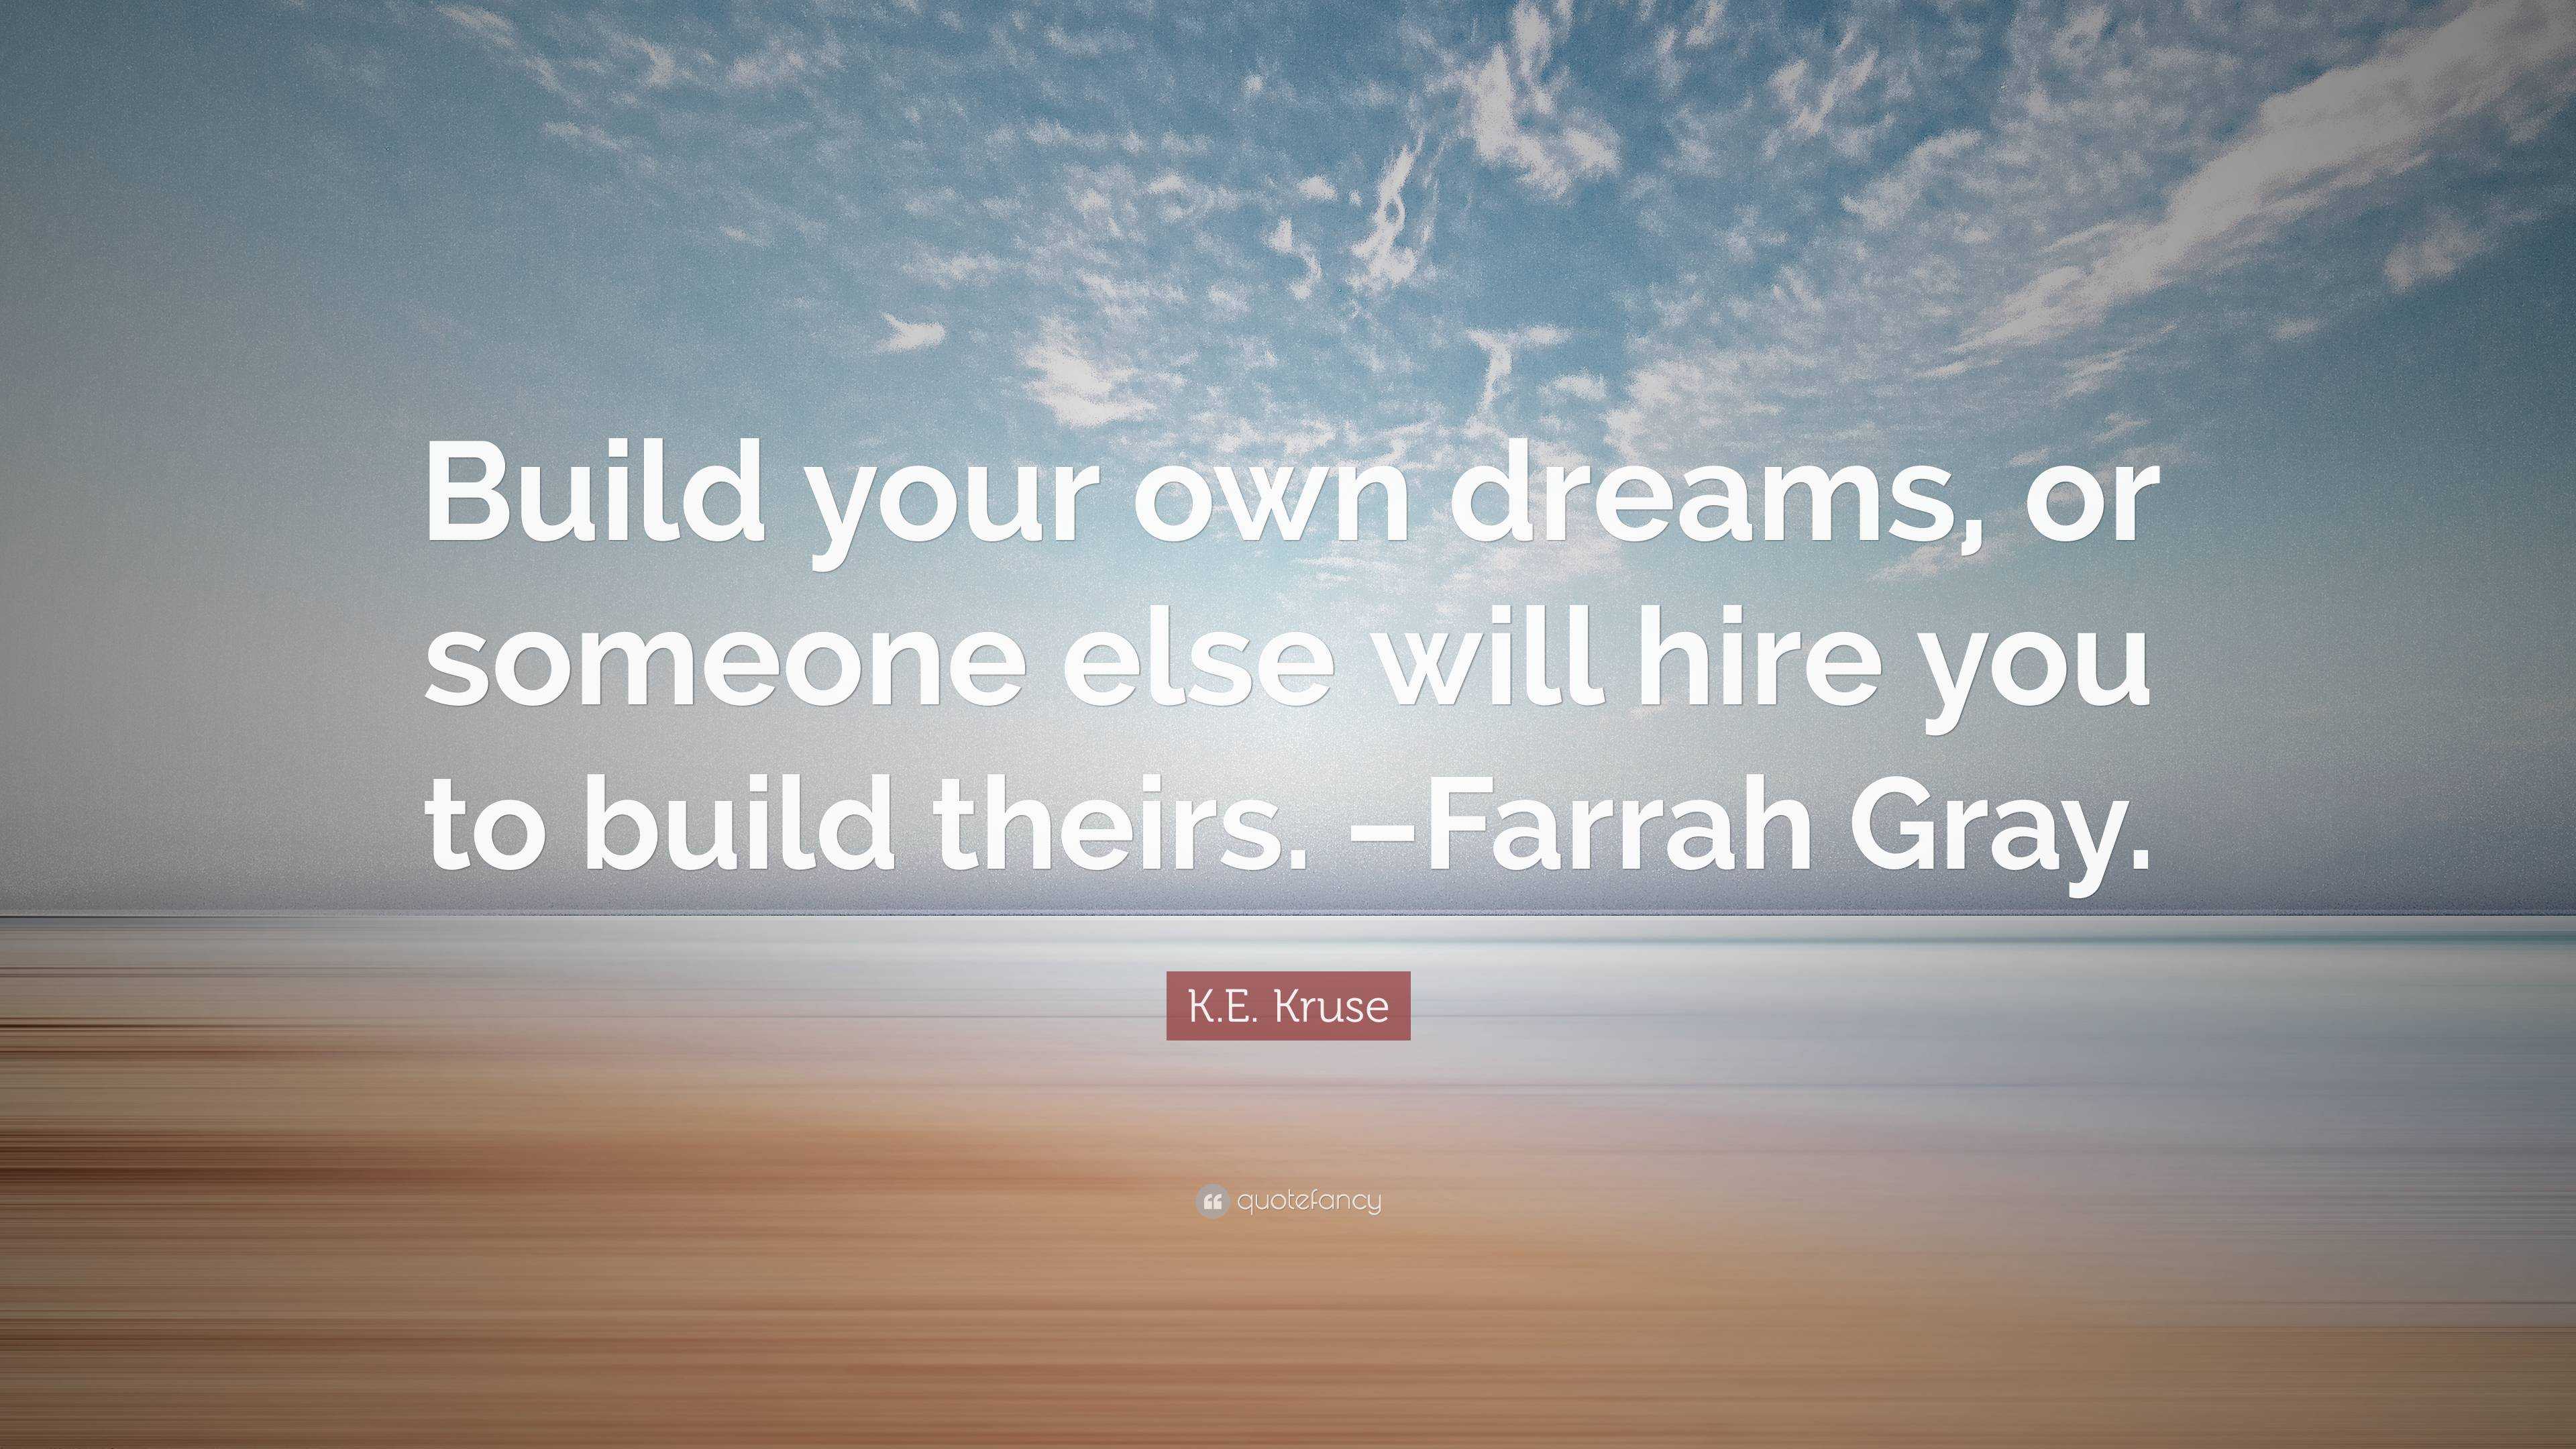 Build your own dreams, or someone else will hire you to build theirs. -  Farrah Gray 